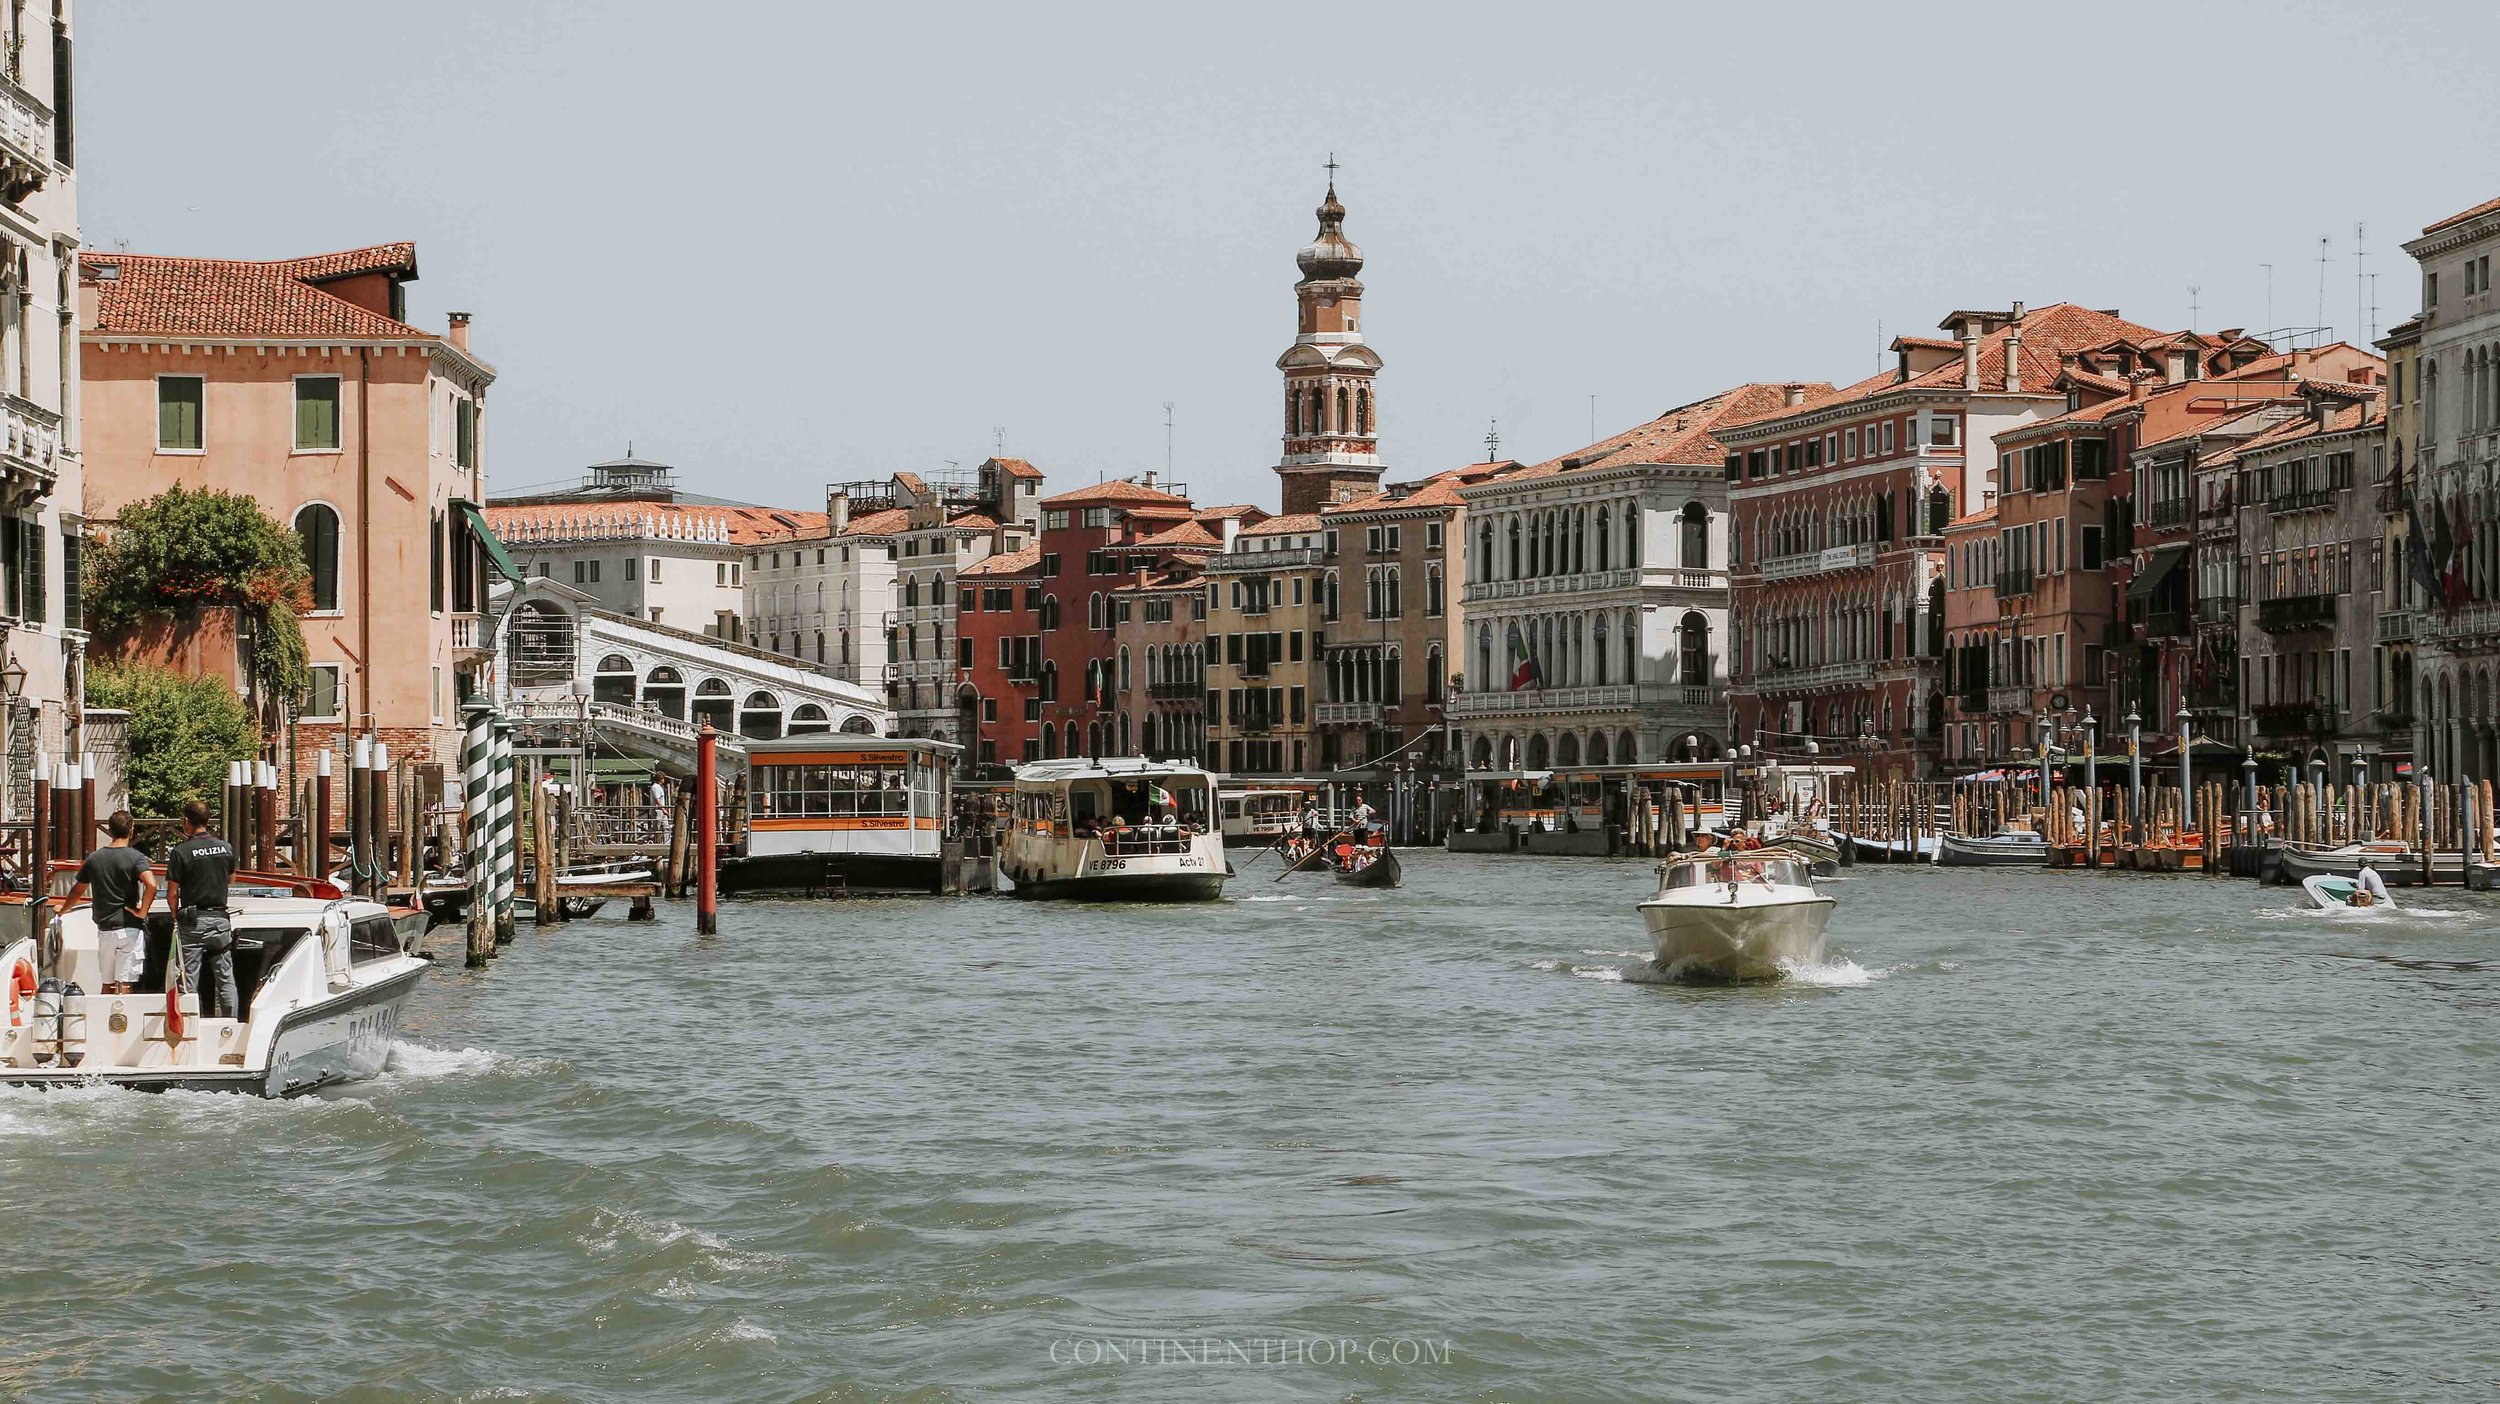 A vaporetto in Venice for tourists going to Murano and Burano